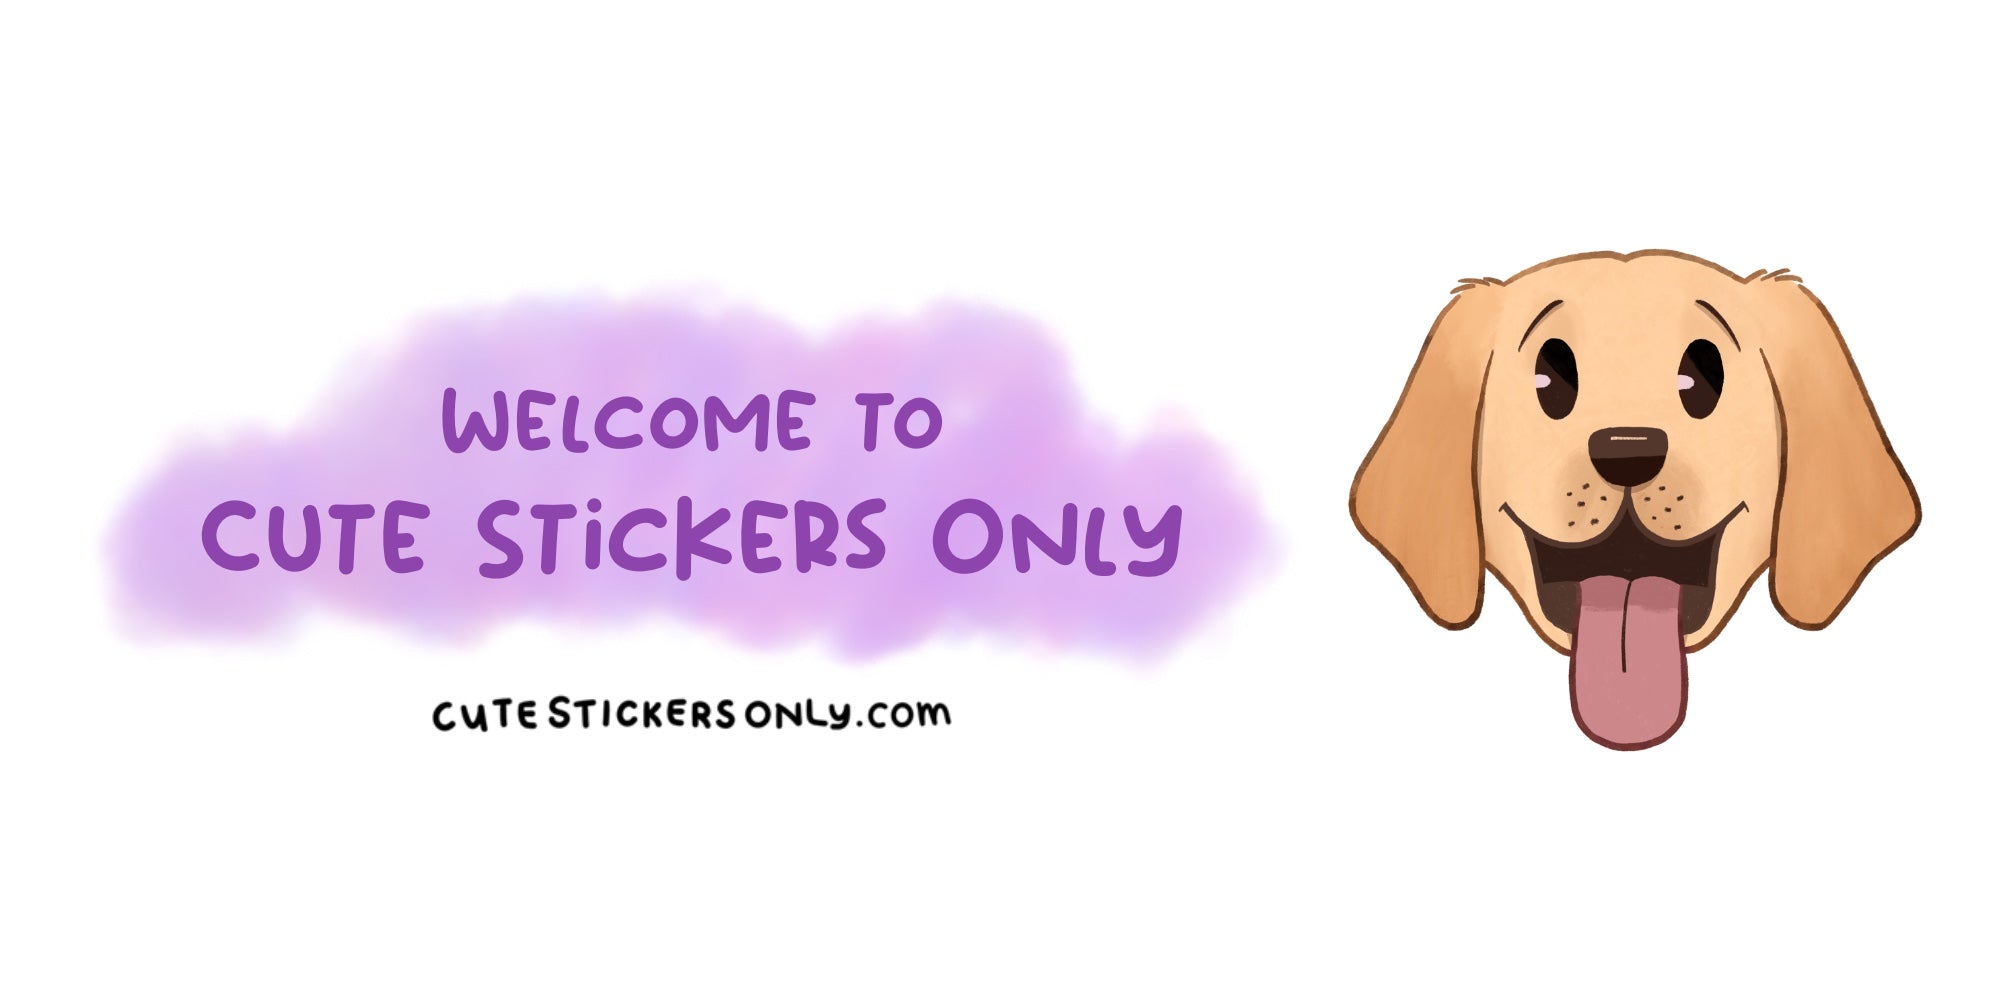 Welcome to Cute Stickers Only